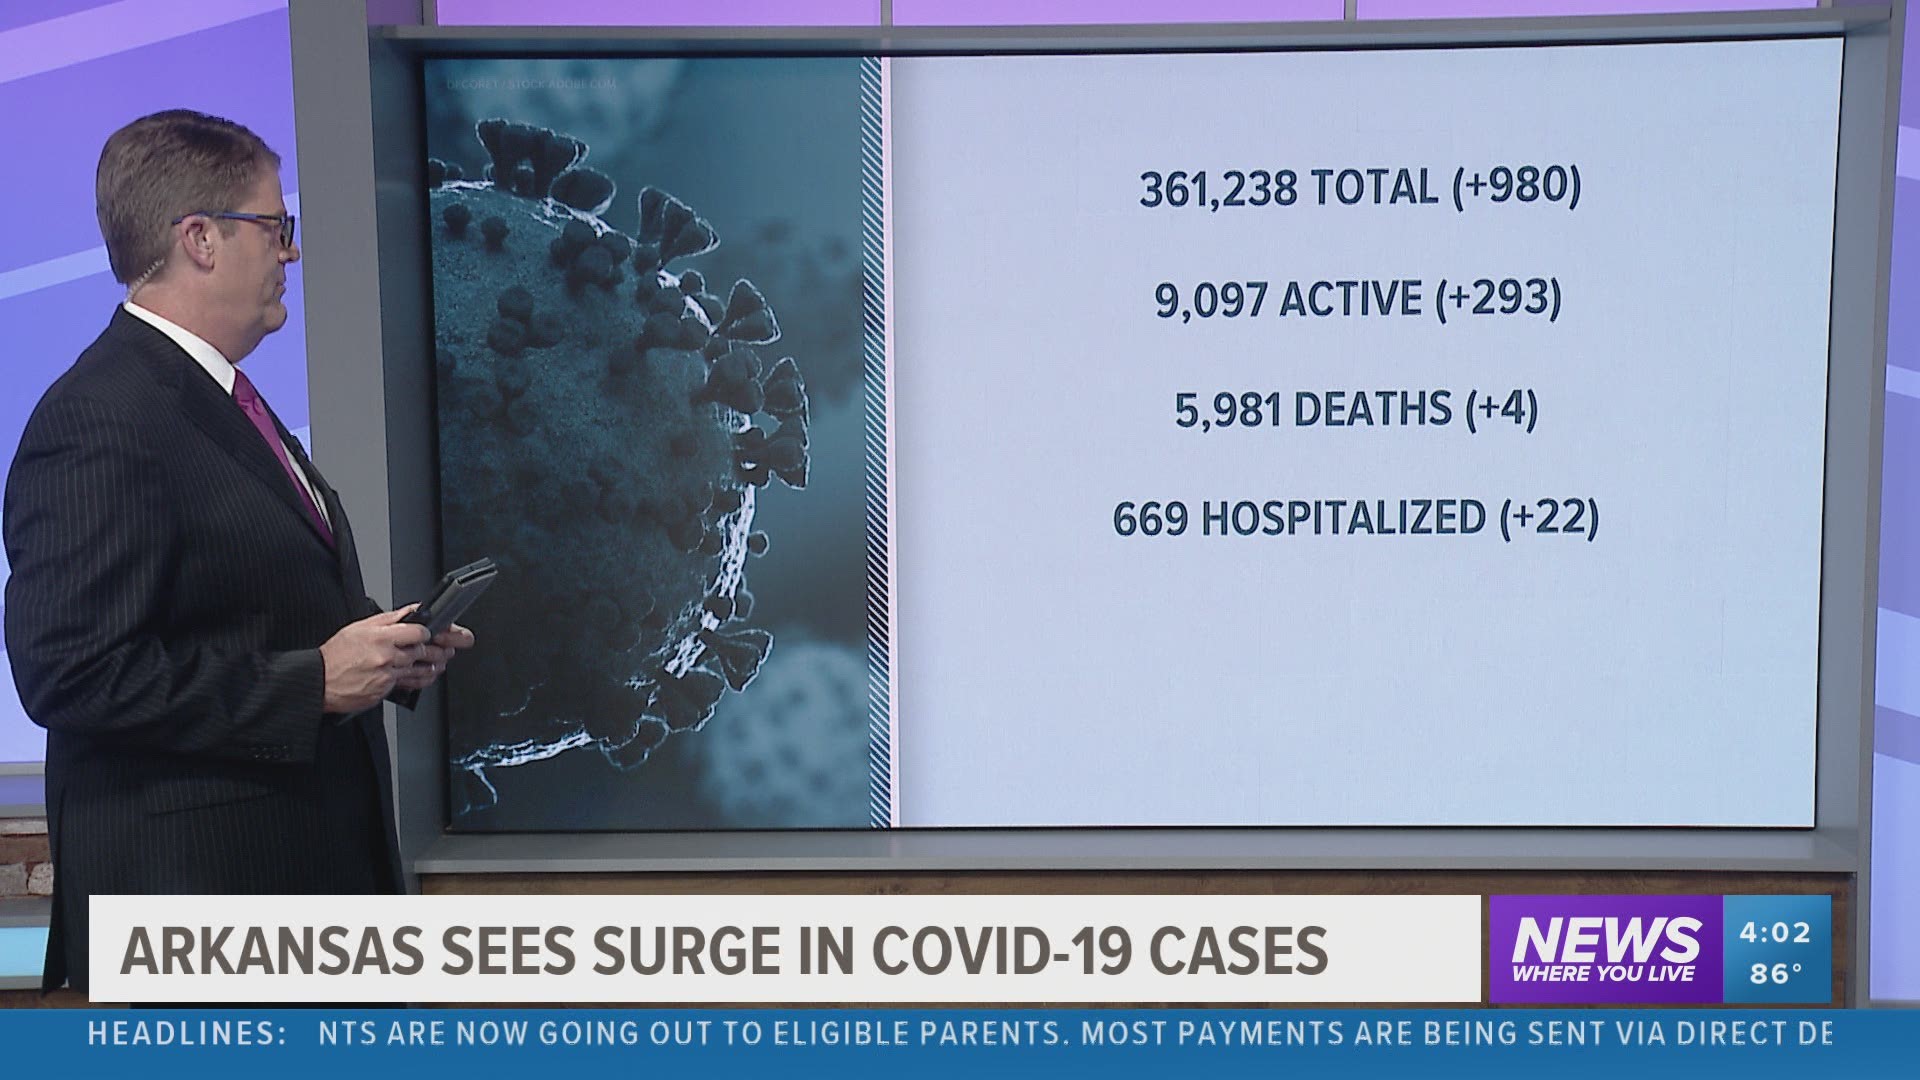 New cases, COVID-19 hospitalizations continue to rise in Arkansas.